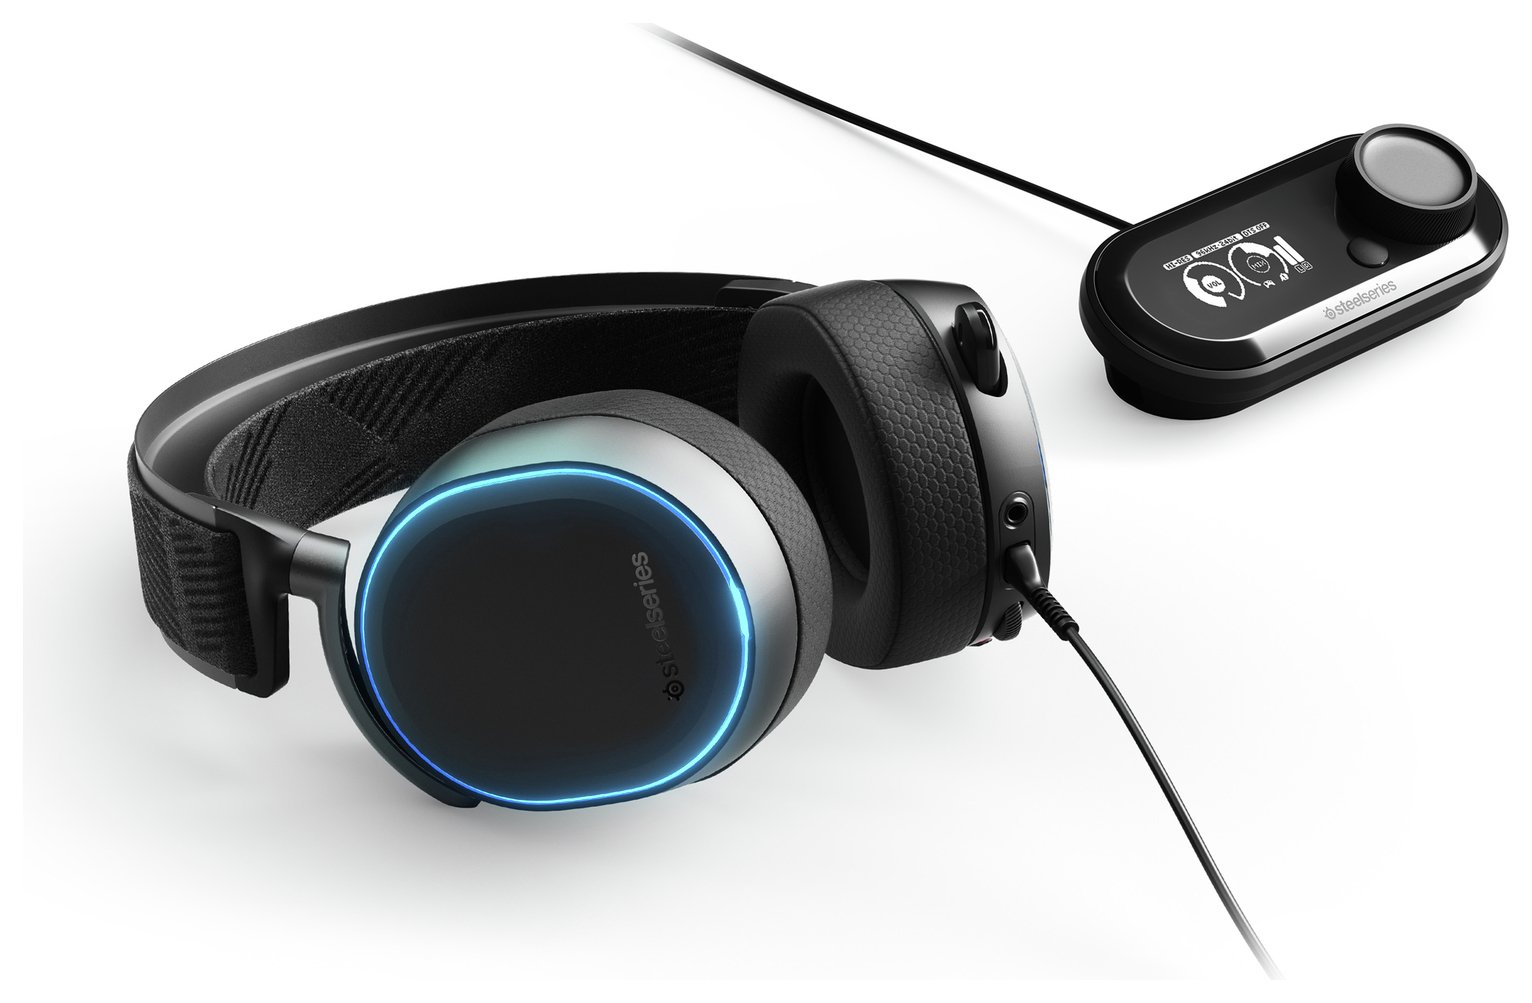 SteelSeries Arctis Pro Gamedac PS4, PC Headset Review